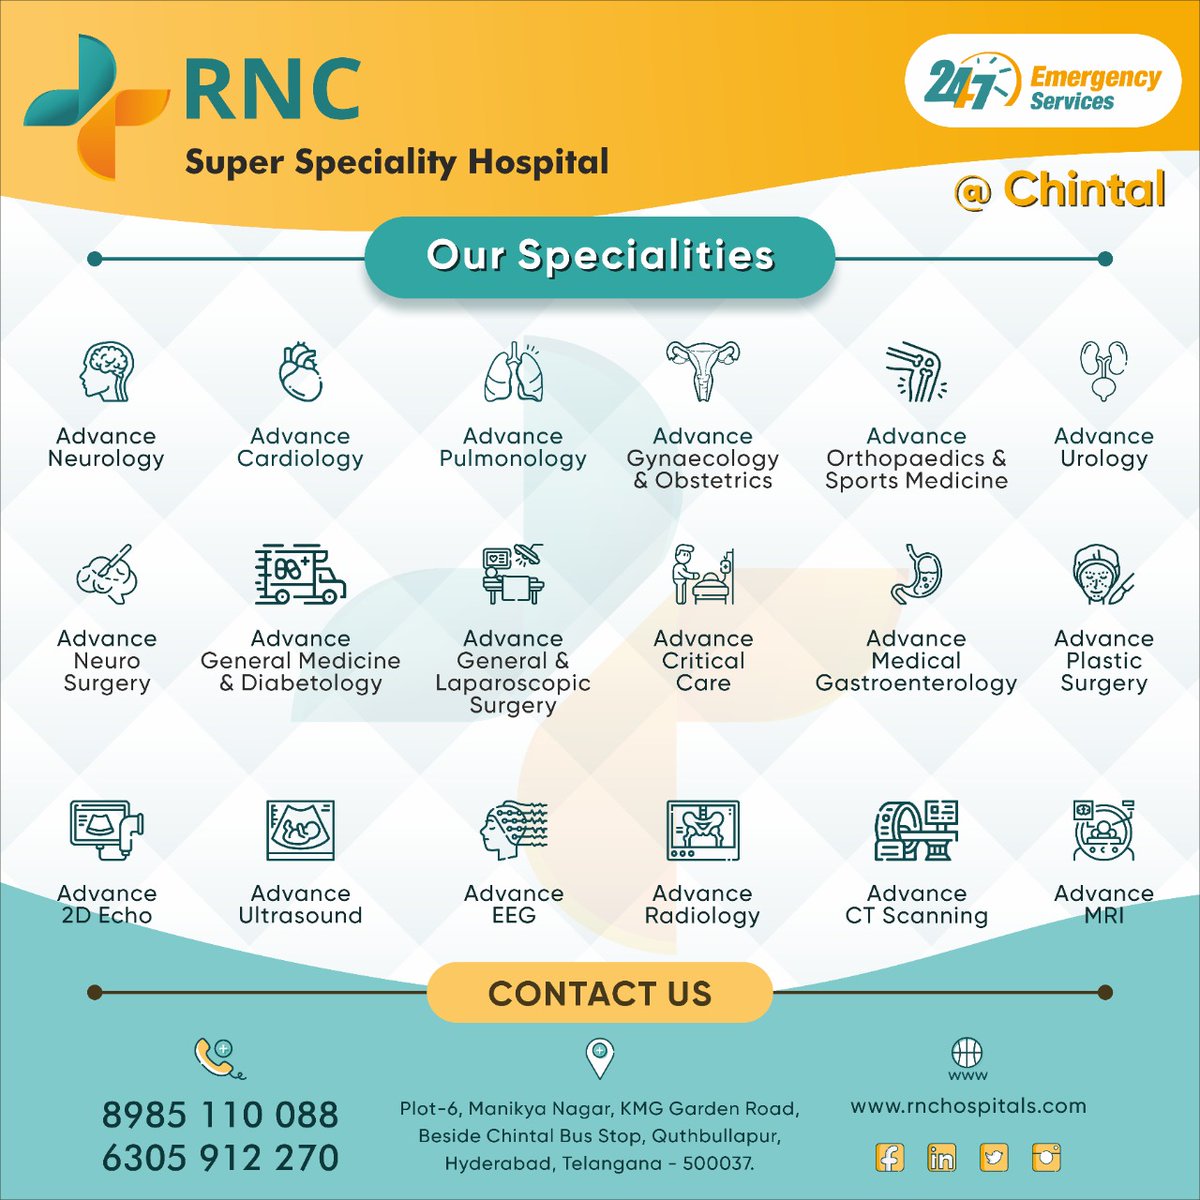 Our Specialties

Reach us: +91-8985110088
Website: rnchospitals.com

#OurSpecialities #neurology #cardiology #Pulmonology #obstetricsandgynecology #orthopaedics #orthopaedicspecialist #urology #neurosurgery #generalmedicine #Diabetologist #chintal #rnchospital